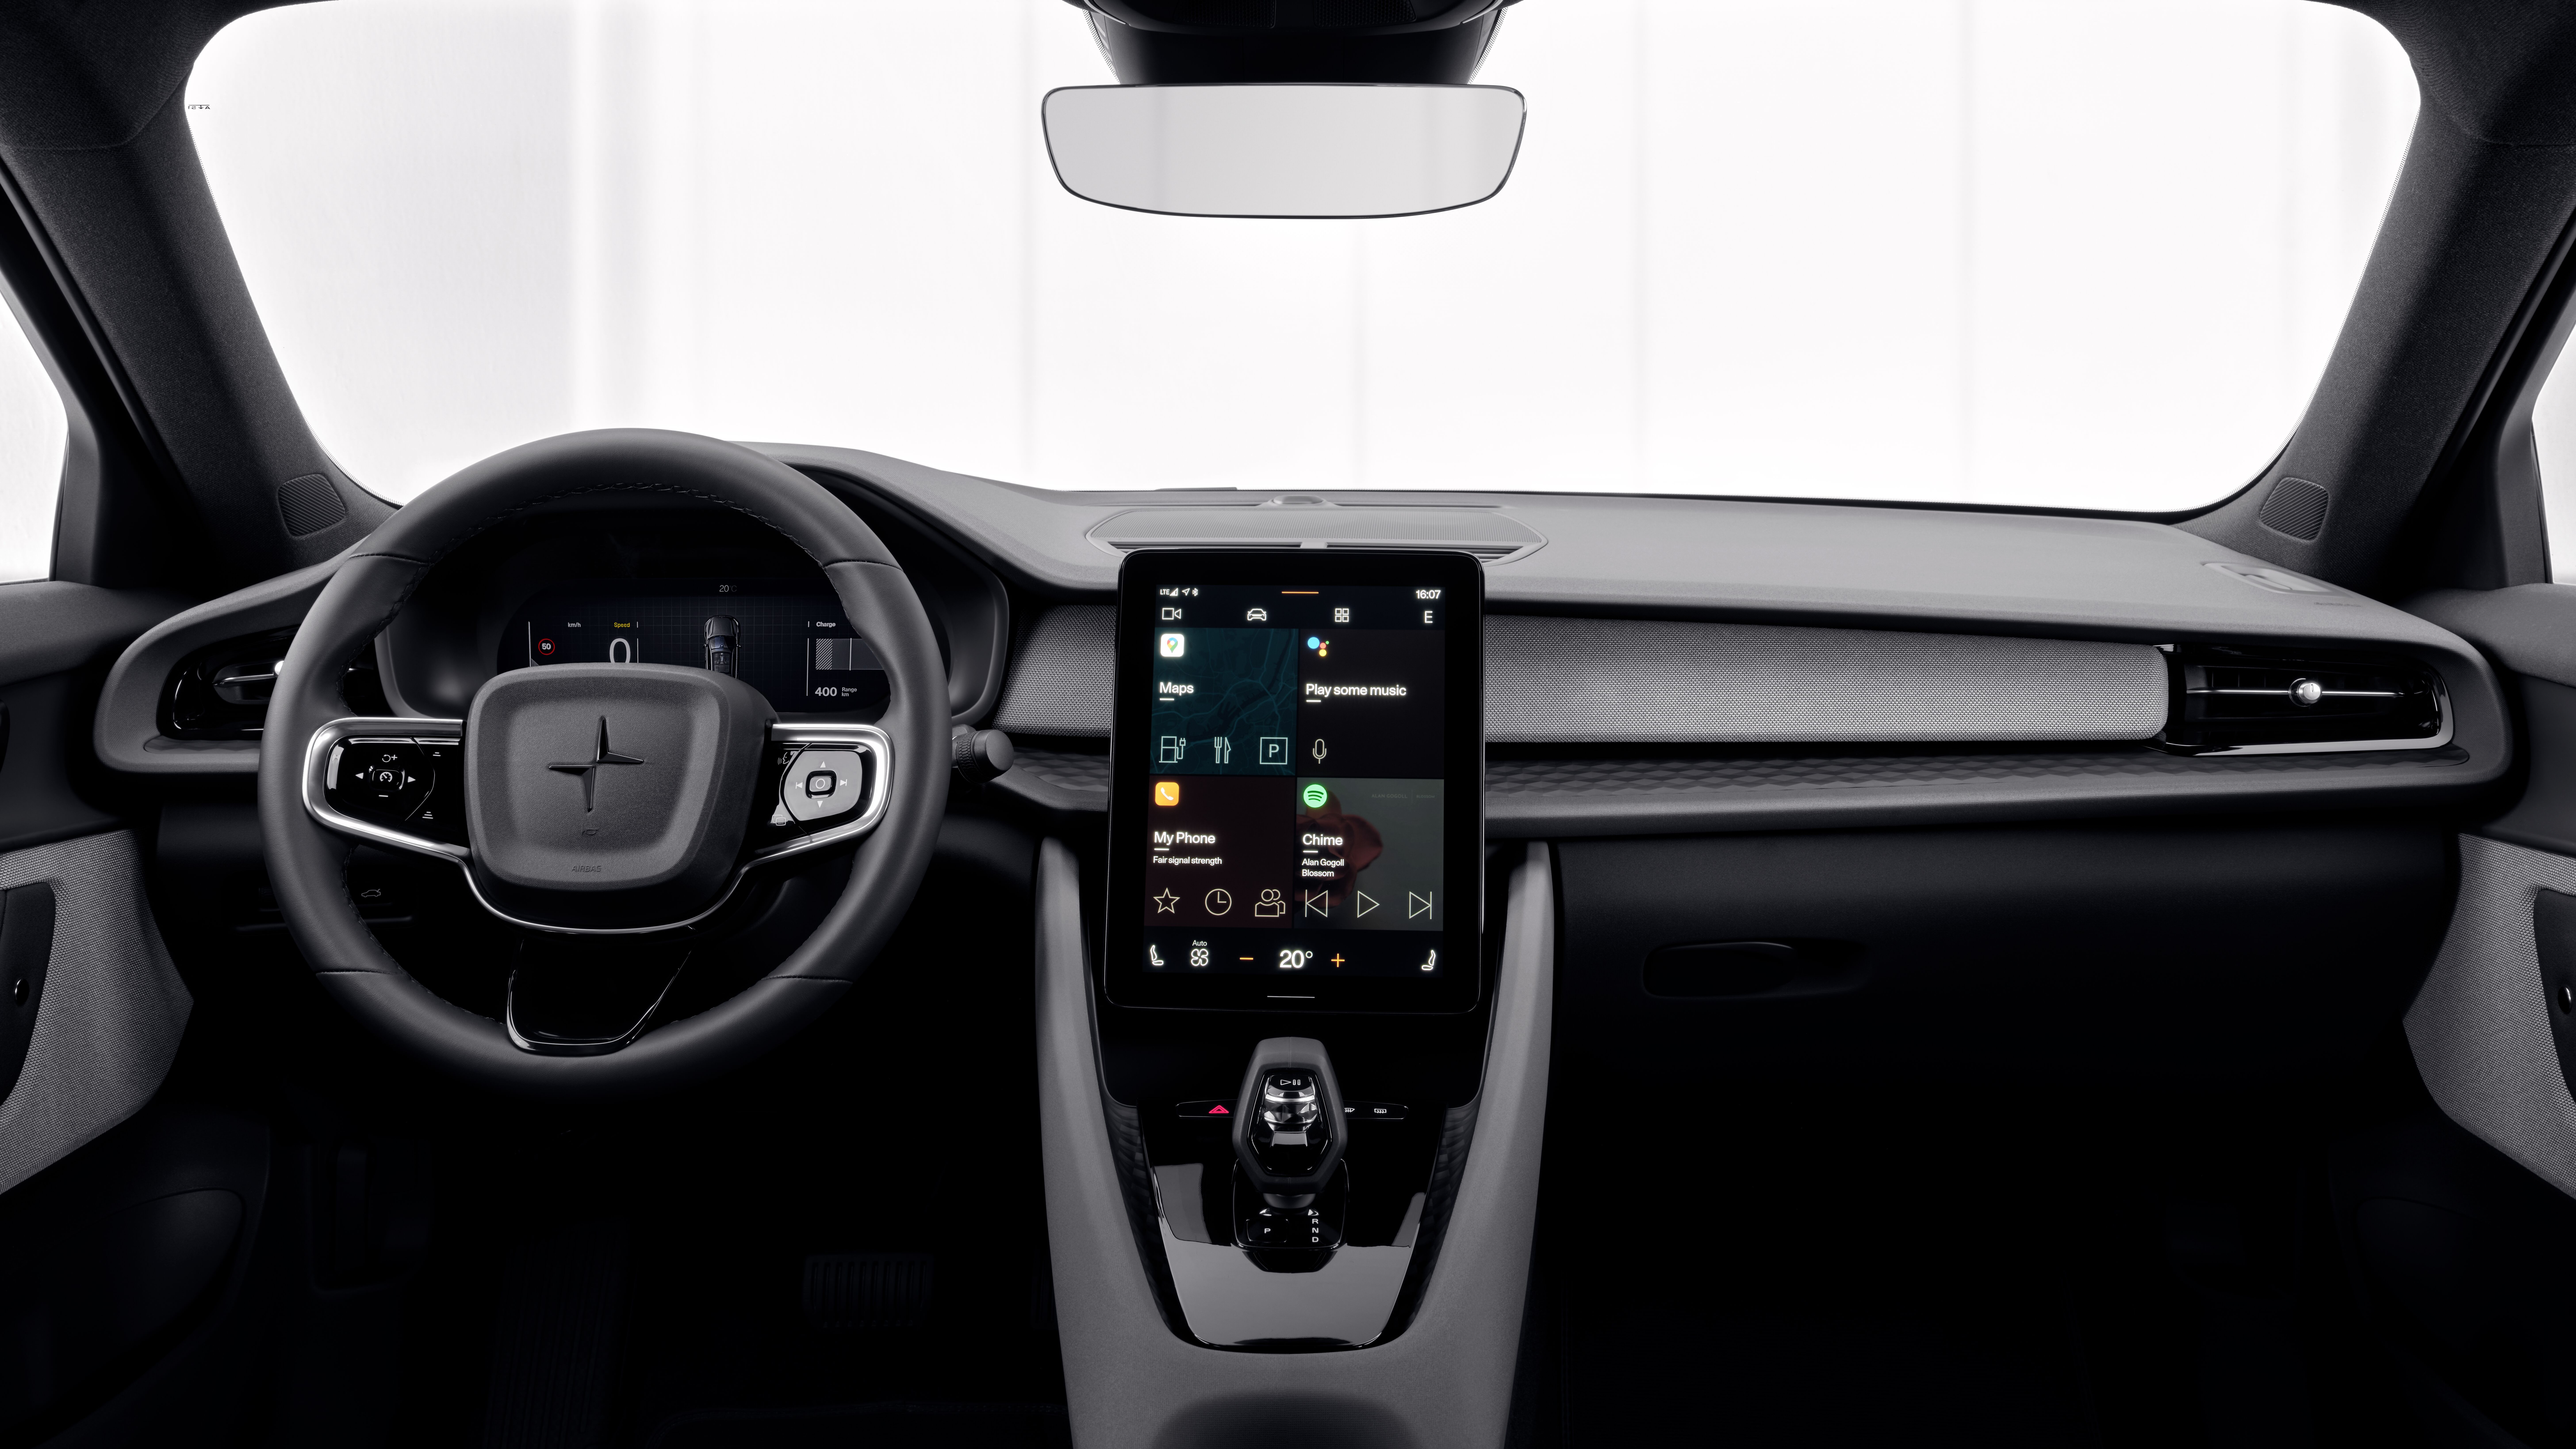 Overview of the front panel in Polestar 2 from rear passenger seat